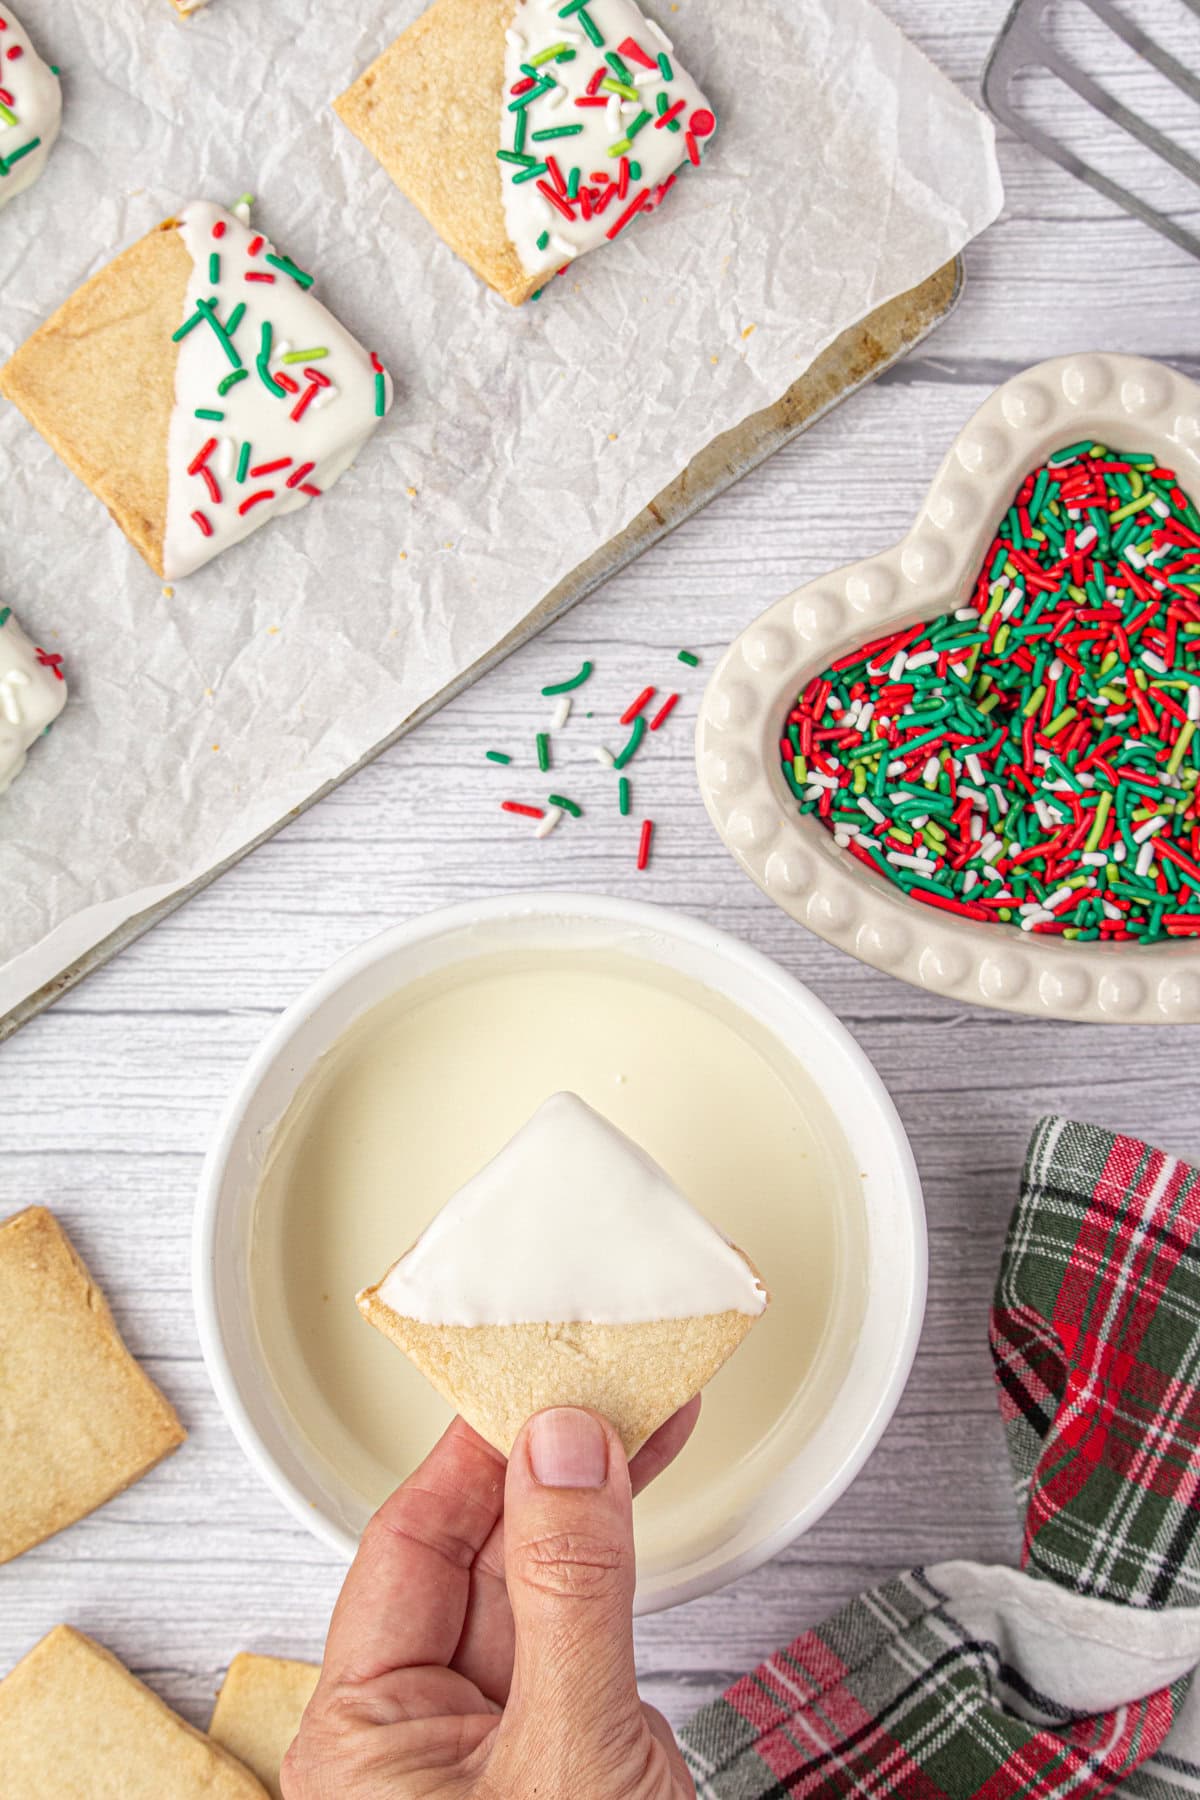 Dipping the baked shortbread cookies into melted white chocolate.